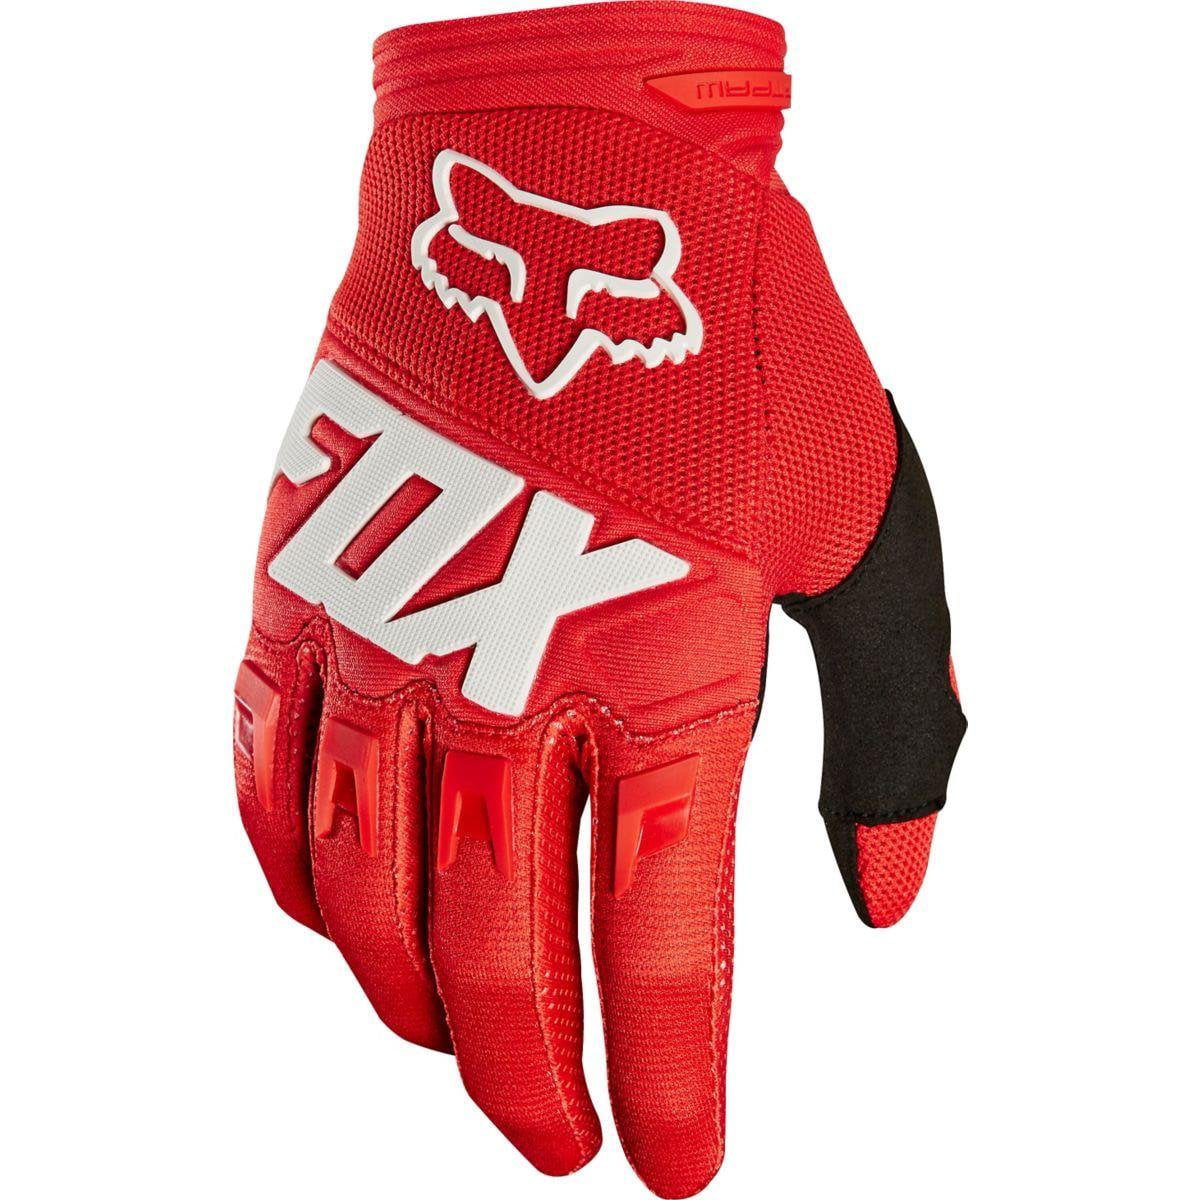 Motorcycle Gloves Racing Full Finger Protective Polyester Motocross Harley Bmw